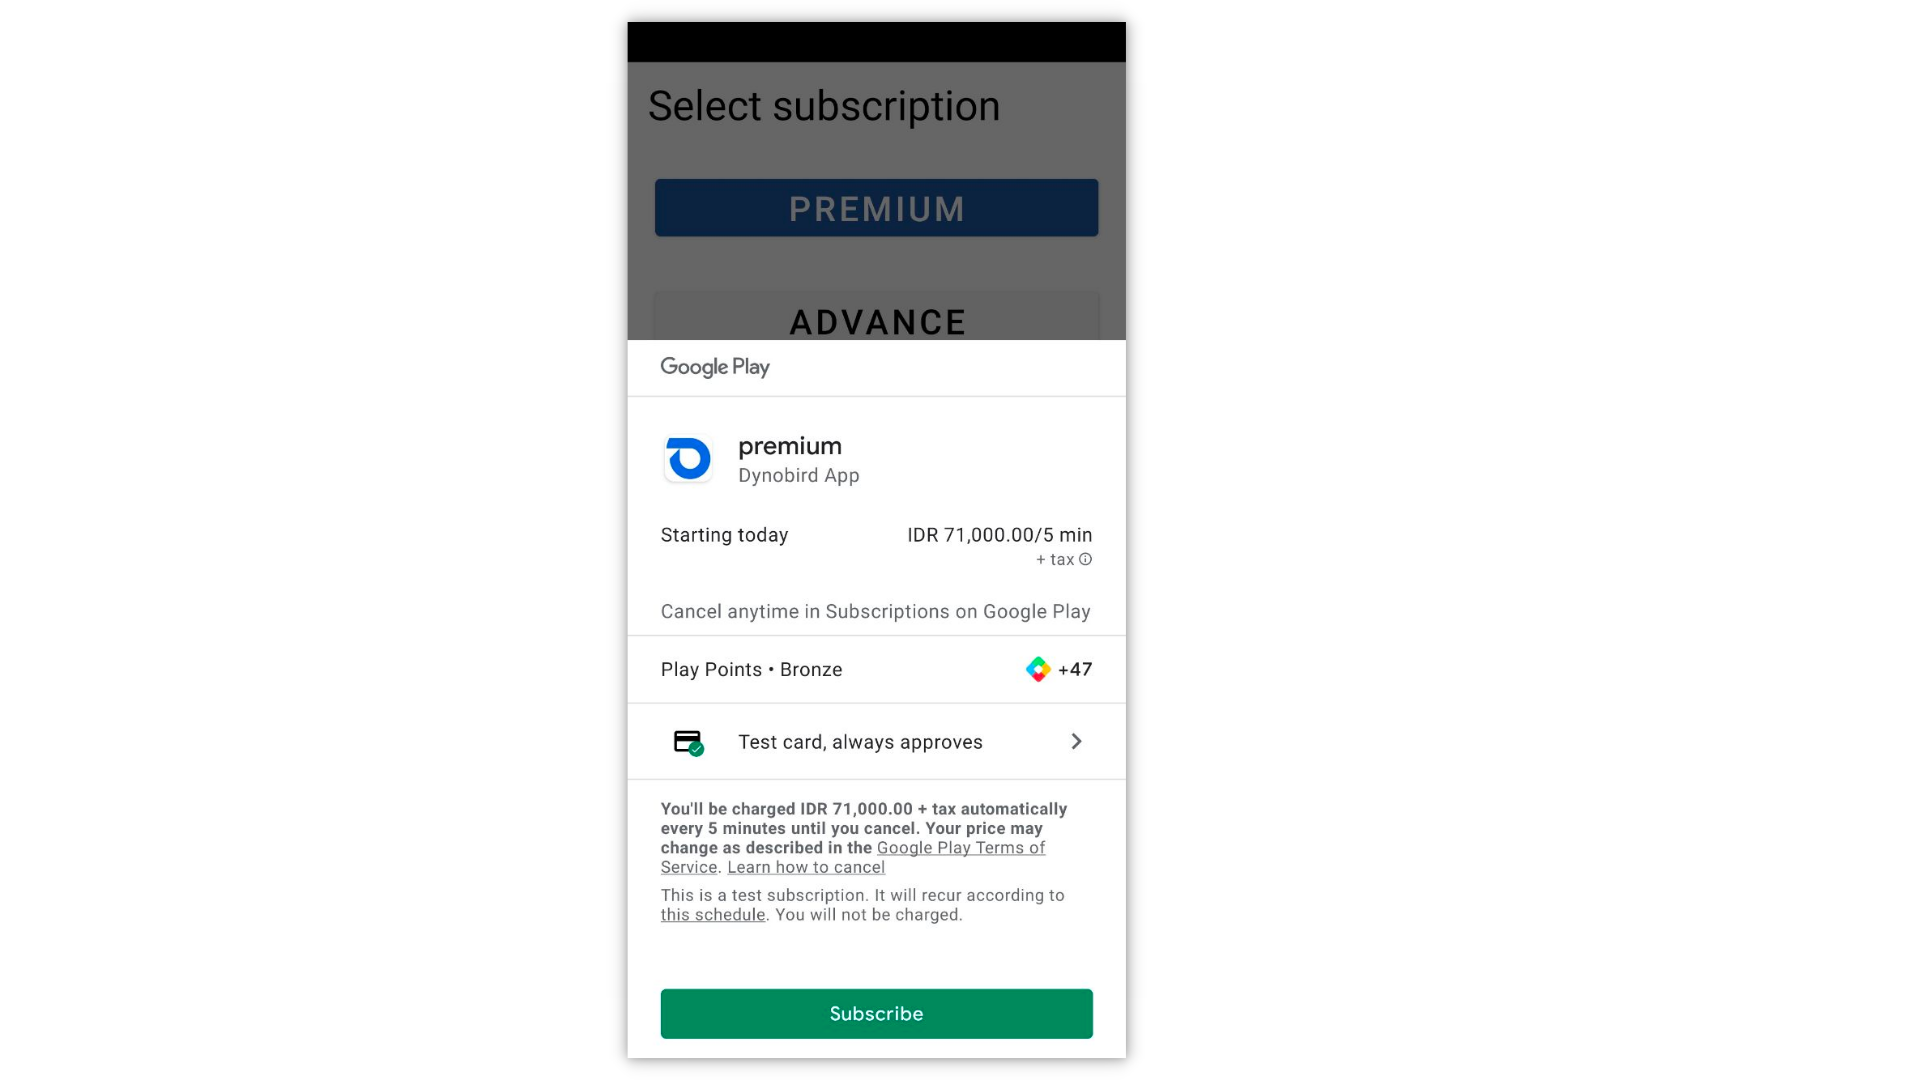 Pay selected subscription